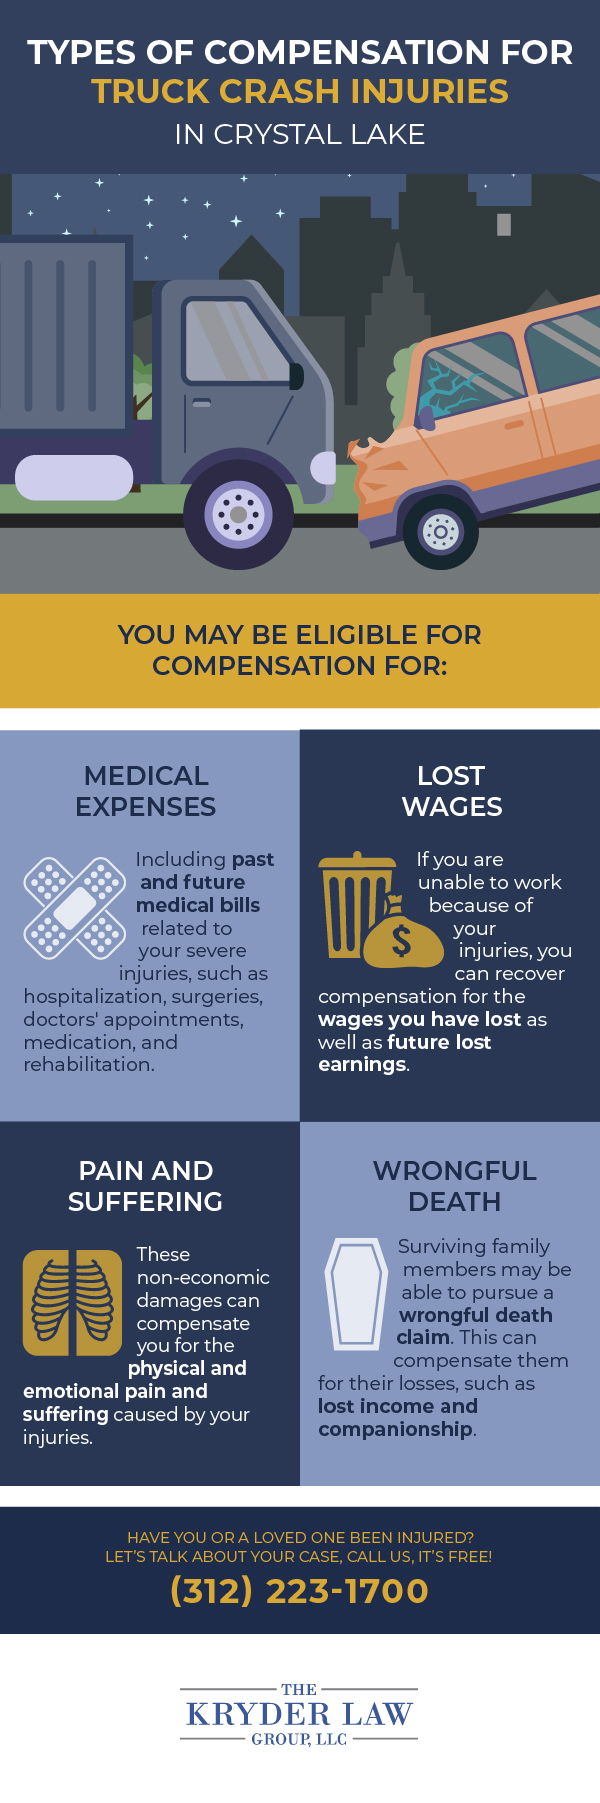 The Benefits of Hiring a Crystal Lake Truck Accident Lawyer Infographic